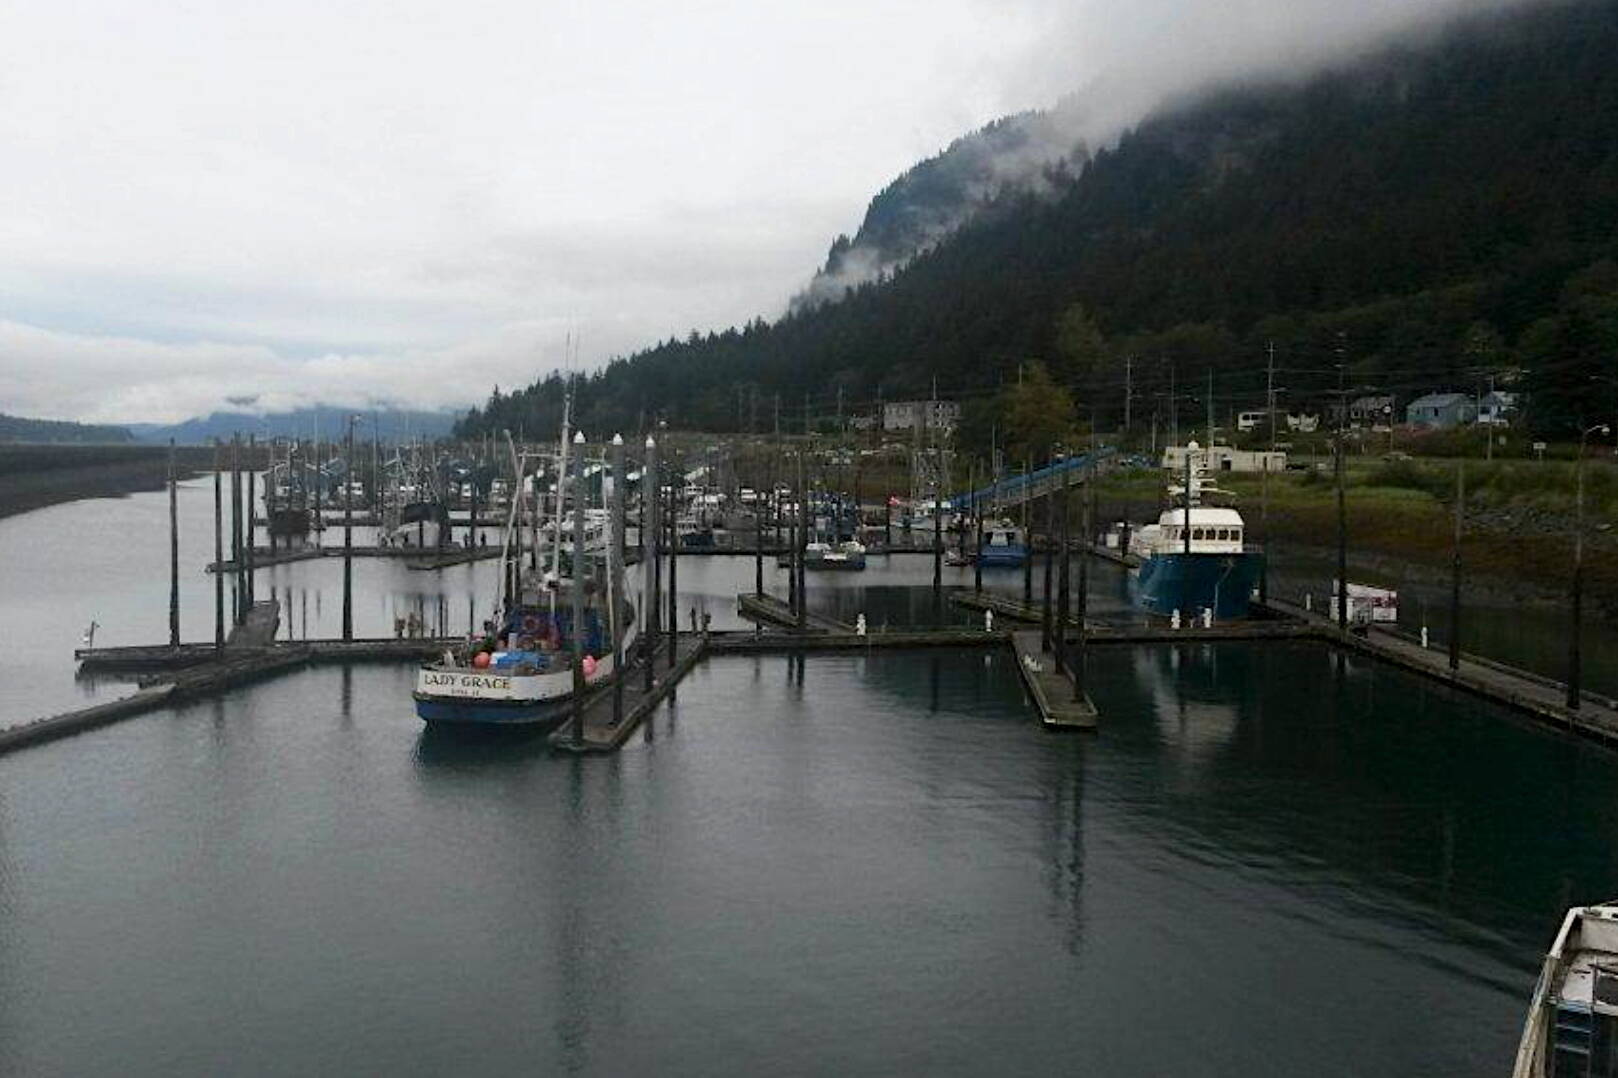 City and Borough of Juneau photo
Aurora Harbor is where a Tennessee fugitive wanted for child rape and related charges was staying on a houseboat when he was apprehended by U.S. Marshals last week.